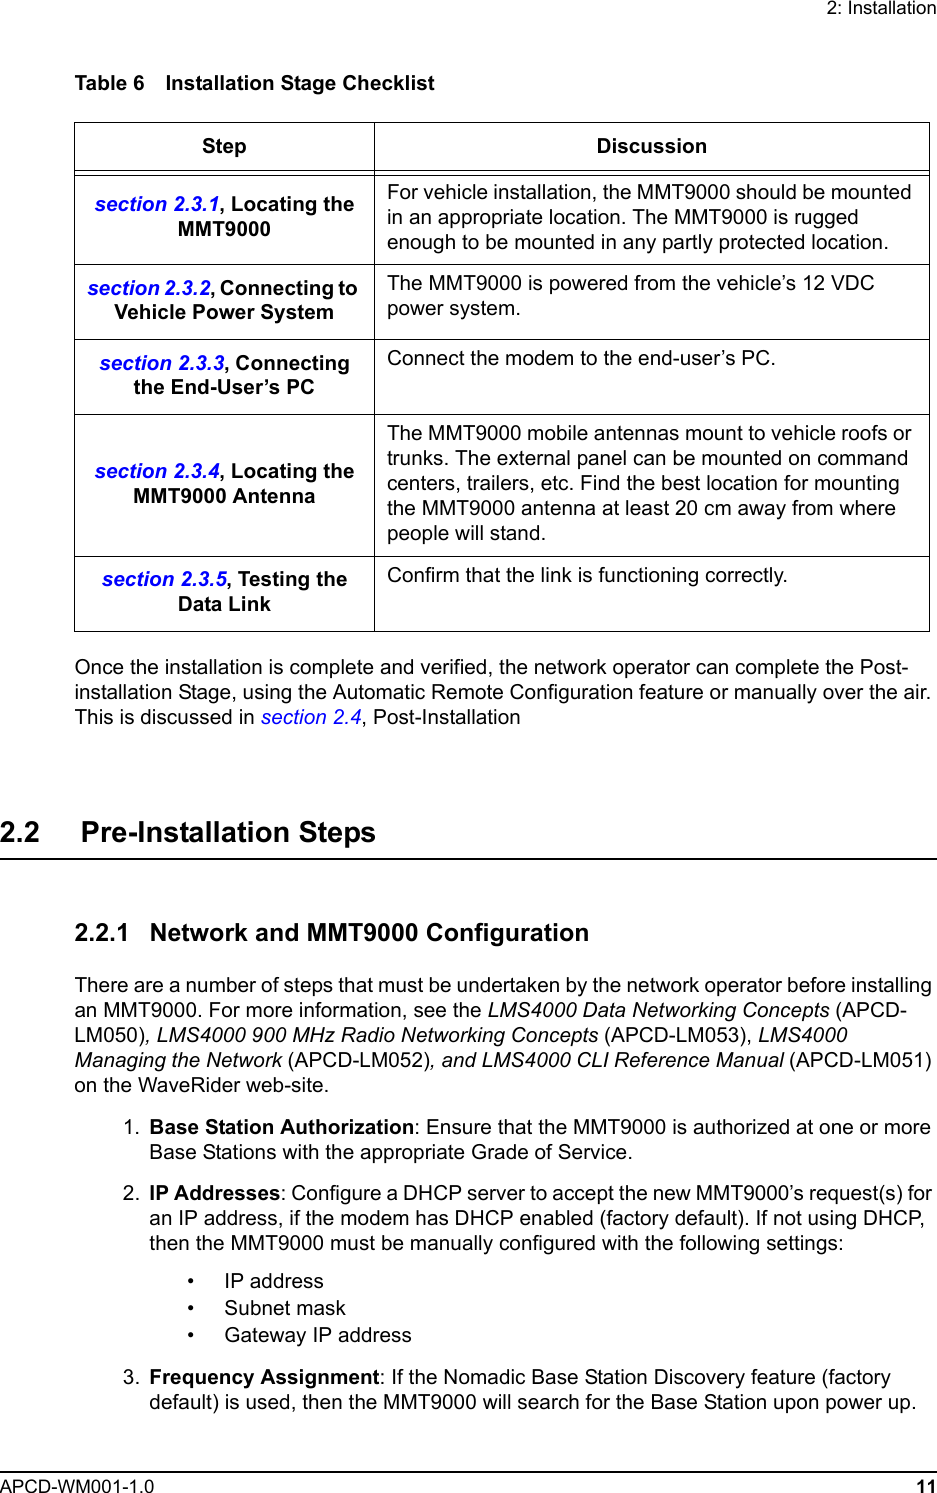 2: InstallationAPCD-WM001-1.0 11Table 6 Installation Stage ChecklistOnce the installation is complete and verified, the network operator can complete the Post-installation Stage, using the Automatic Remote Configuration feature or manually over the air. This is discussed in section 2.4, Post-Installation2.2     Pre-Installation Steps2.2.1 Network and MMT9000 ConfigurationThere are a number of steps that must be undertaken by the network operator before installing an MMT9000. For more information, see the LMS4000 Data Networking Concepts (APCD-LM050), LMS4000 900 MHz Radio Networking Concepts (APCD-LM053), LMS4000 Managing the Network (APCD-LM052), and LMS4000 CLI Reference Manual (APCD-LM051) on the WaveRider web-site. 1. Base Station Authorization: Ensure that the MMT9000 is authorized at one or more Base Stations with the appropriate Grade of Service.  2. IP Addresses: Configure a DHCP server to accept the new MMT9000’s request(s) for an IP address, if the modem has DHCP enabled (factory default). If not using DHCP, then the MMT9000 must be manually configured with the following settings:• IP address• Subnet mask• Gateway IP address 3. Frequency Assignment: If the Nomadic Base Station Discovery feature (factory default) is used, then the MMT9000 will search for the Base Station upon power up. Step Discussionsection 2.3.1, Locating the MMT9000For vehicle installation, the MMT9000 should be mounted in an appropriate location. The MMT9000 is rugged enough to be mounted in any partly protected location.section 2.3.2, Connecting to Vehicle Power SystemThe MMT9000 is powered from the vehicle’s 12 VDC power system.section 2.3.3, Connecting the End-User’s PCConnect the modem to the end-user’s PC.section 2.3.4, Locating the MMT9000 AntennaThe MMT9000 mobile antennas mount to vehicle roofs or trunks. The external panel can be mounted on command centers, trailers, etc. Find the best location for mounting the MMT9000 antenna at least 20 cm away from where people will stand.section 2.3.5, Testing the Data LinkConfirm that the link is functioning correctly.